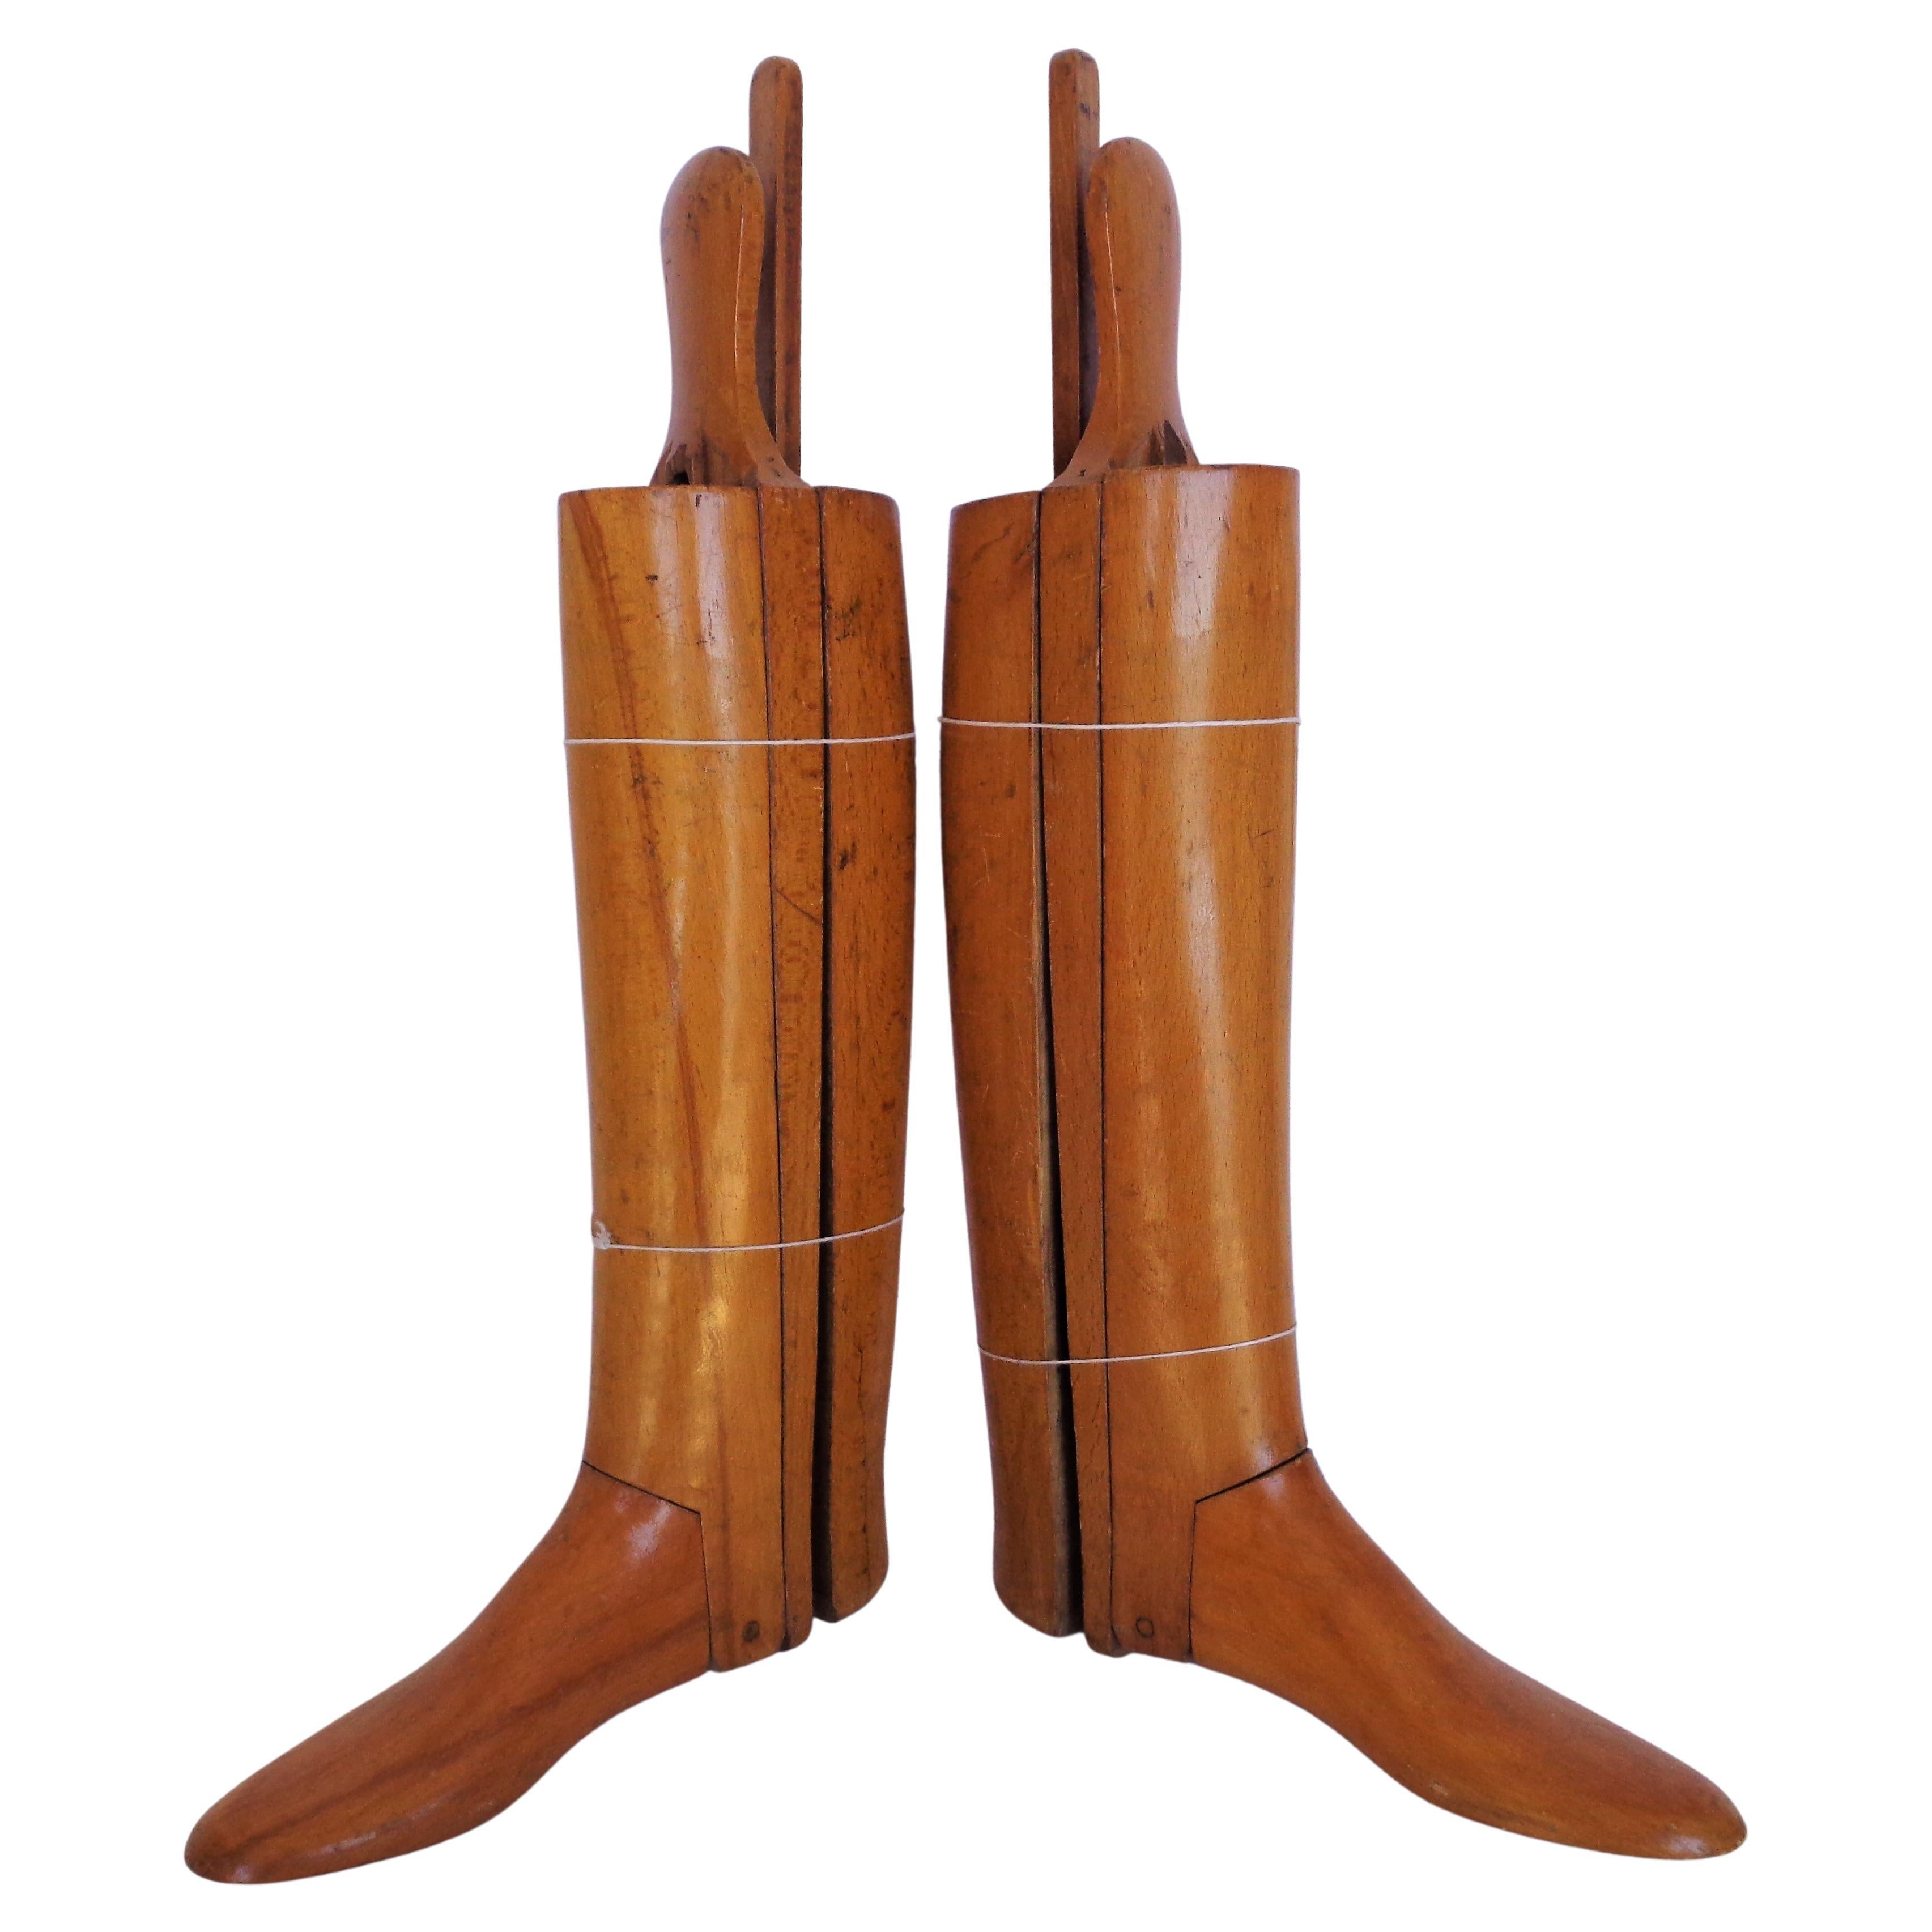 Pair of fine quality antique wood tree stretchers for English leather horse riding boots with pegged articulated construction in overall beautifully aged original glowing honey color. Stamped signed left and right, numbered 905. Look at all pictures